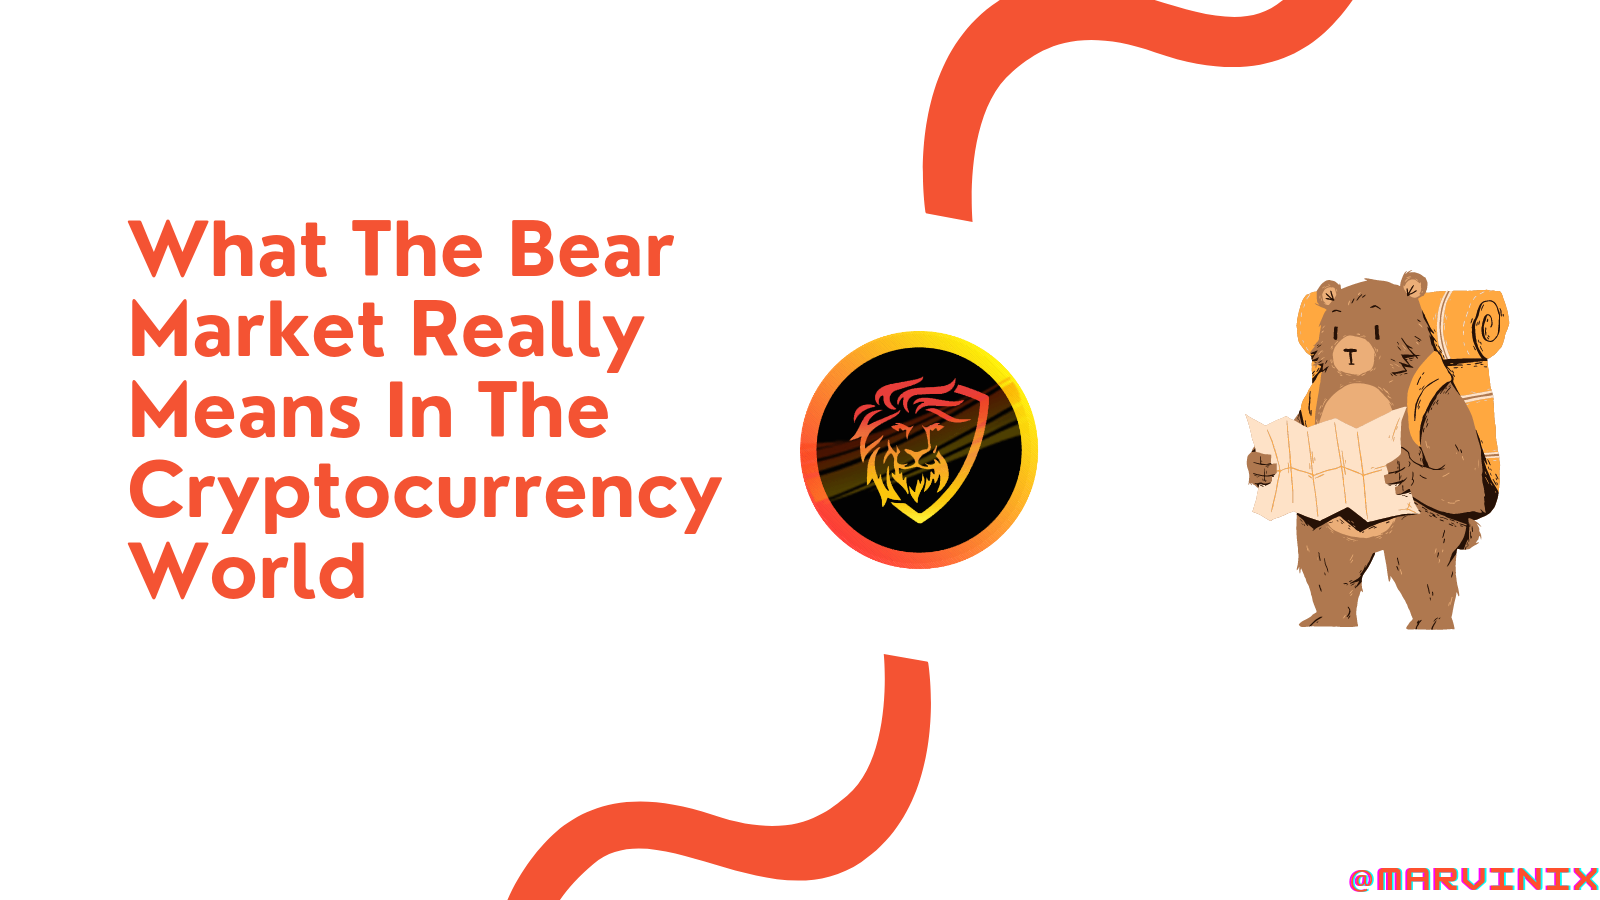 @marvinix/what-the-bear-market-really-means-in-the-cryptocurrency-world